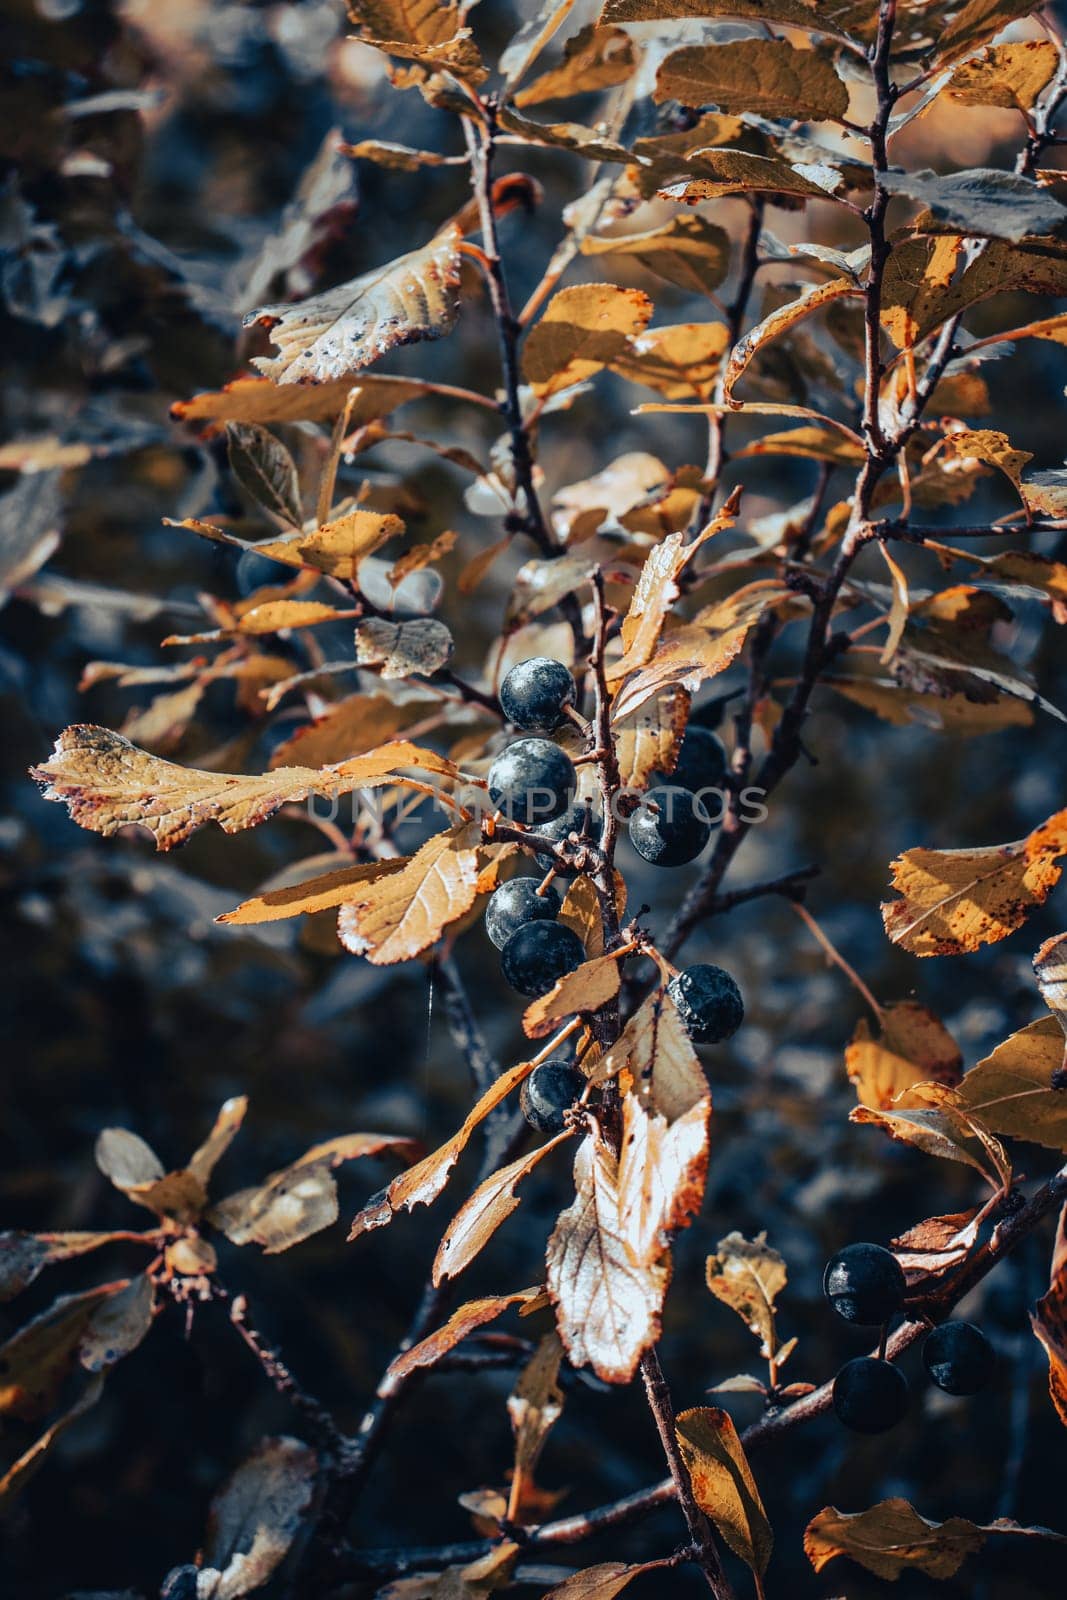 Blackthorn yellow branch leaves with berries concept photo. Prunus spinosa tree, sloe with blue round fruits in garden. Sunny morning, outdoor autumn bushes. High quality picture for wallpaper